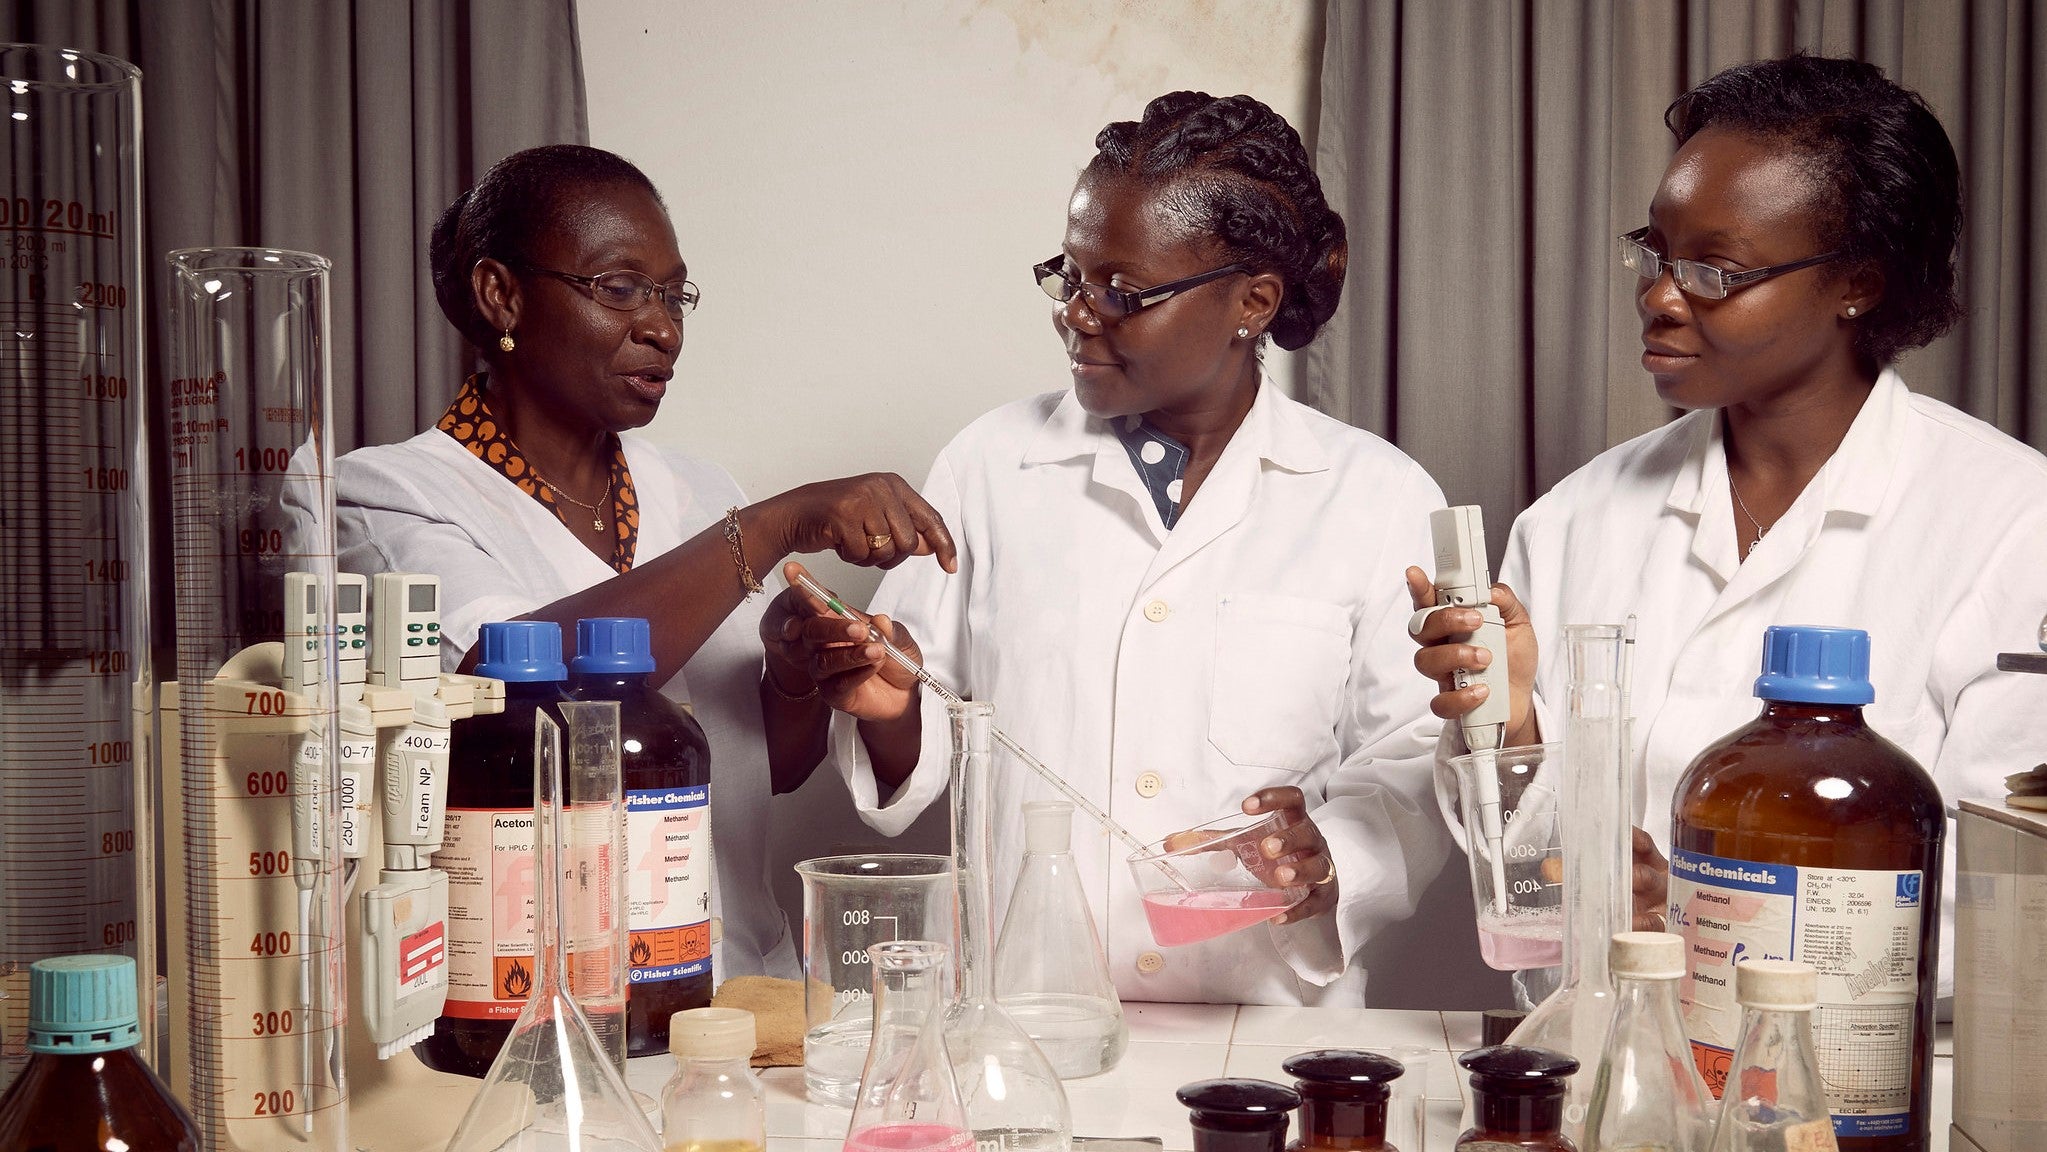 Professor Amivi Kafui Tete-Benissan teaches cell biology and biochemistry.